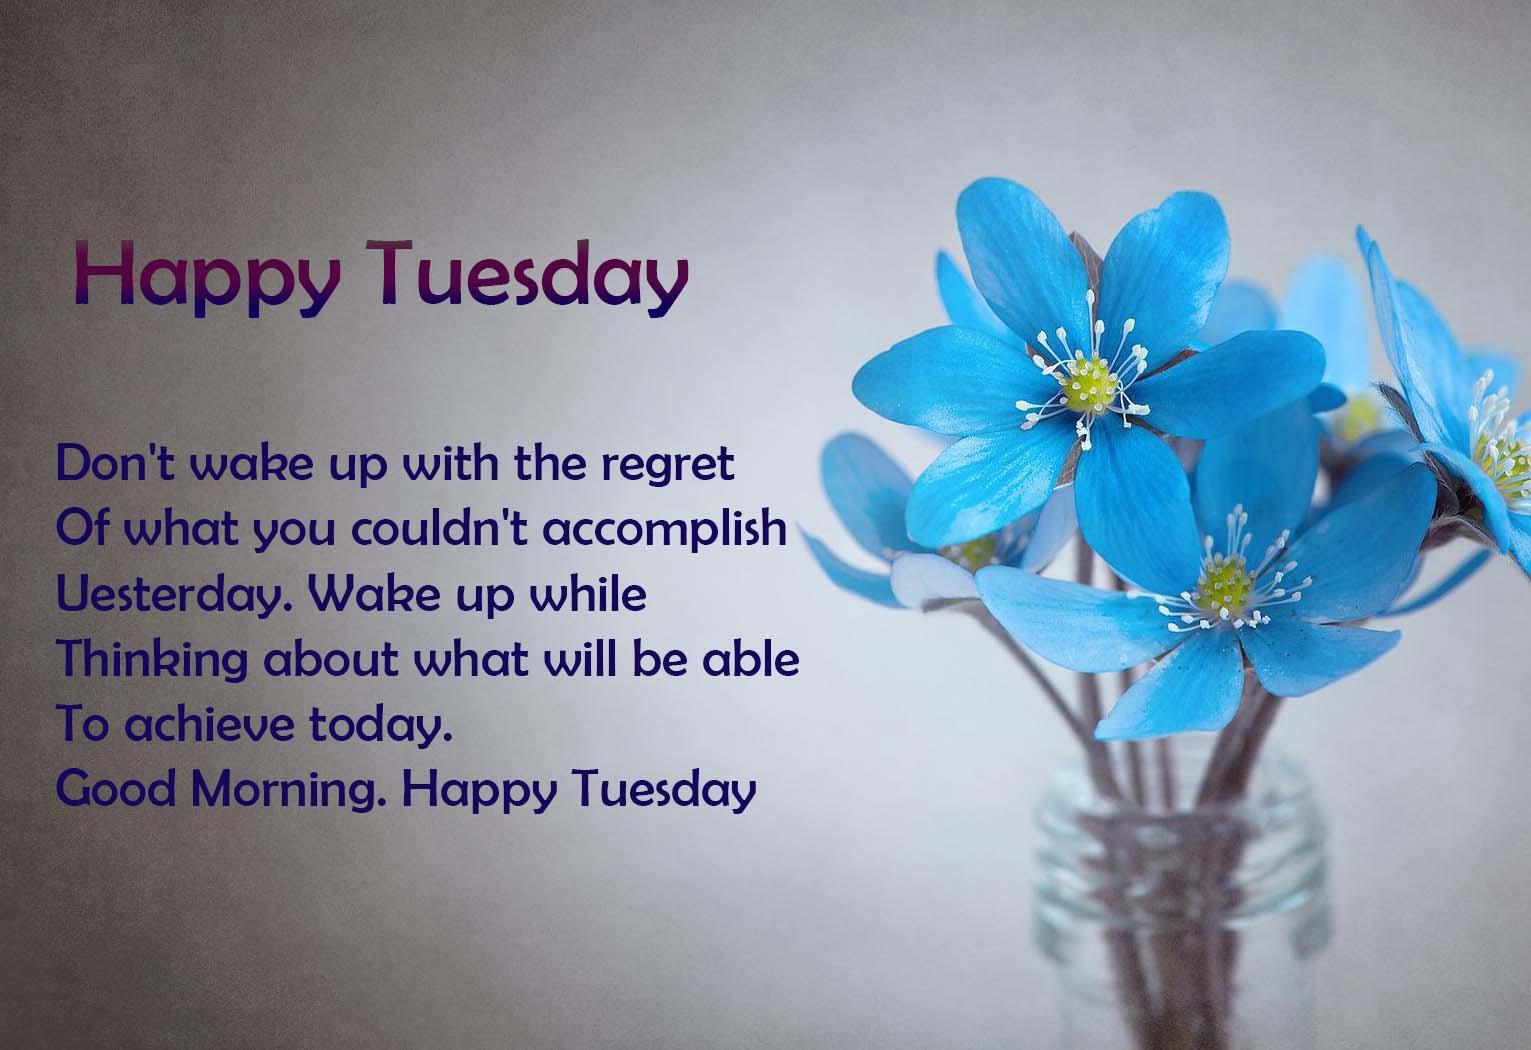 Good Morning Happy Tuesday Image Wishes